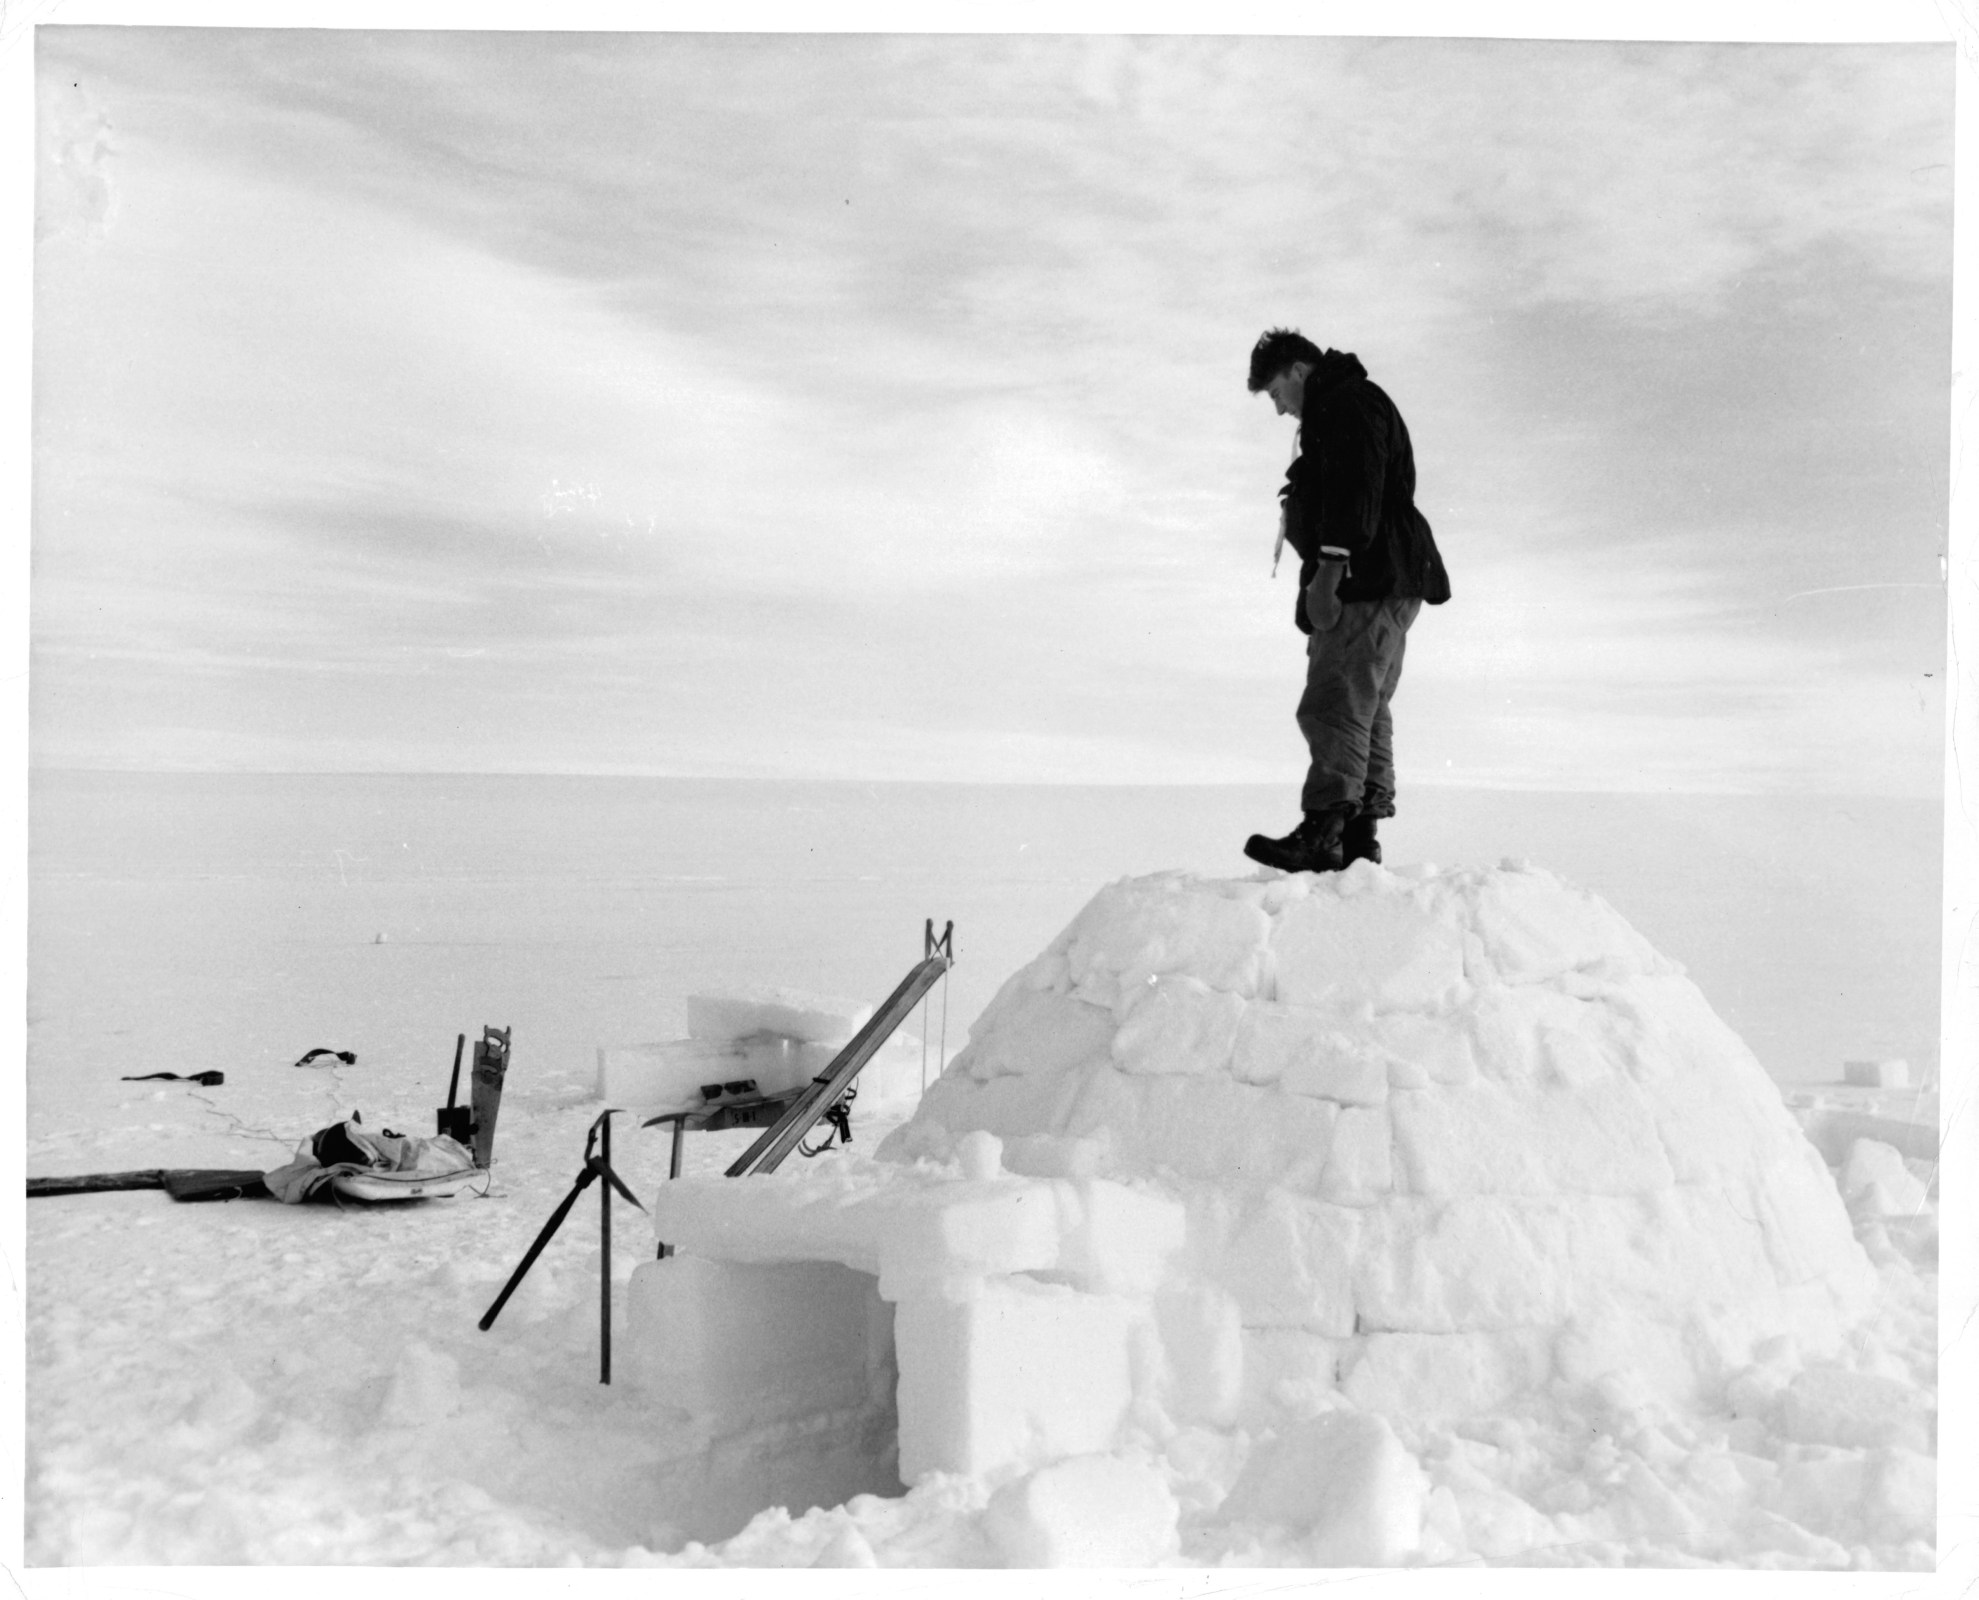 A man is standing on an igloo, in the near and far distance, there is snow for miles and miles in Greenland, 1953.